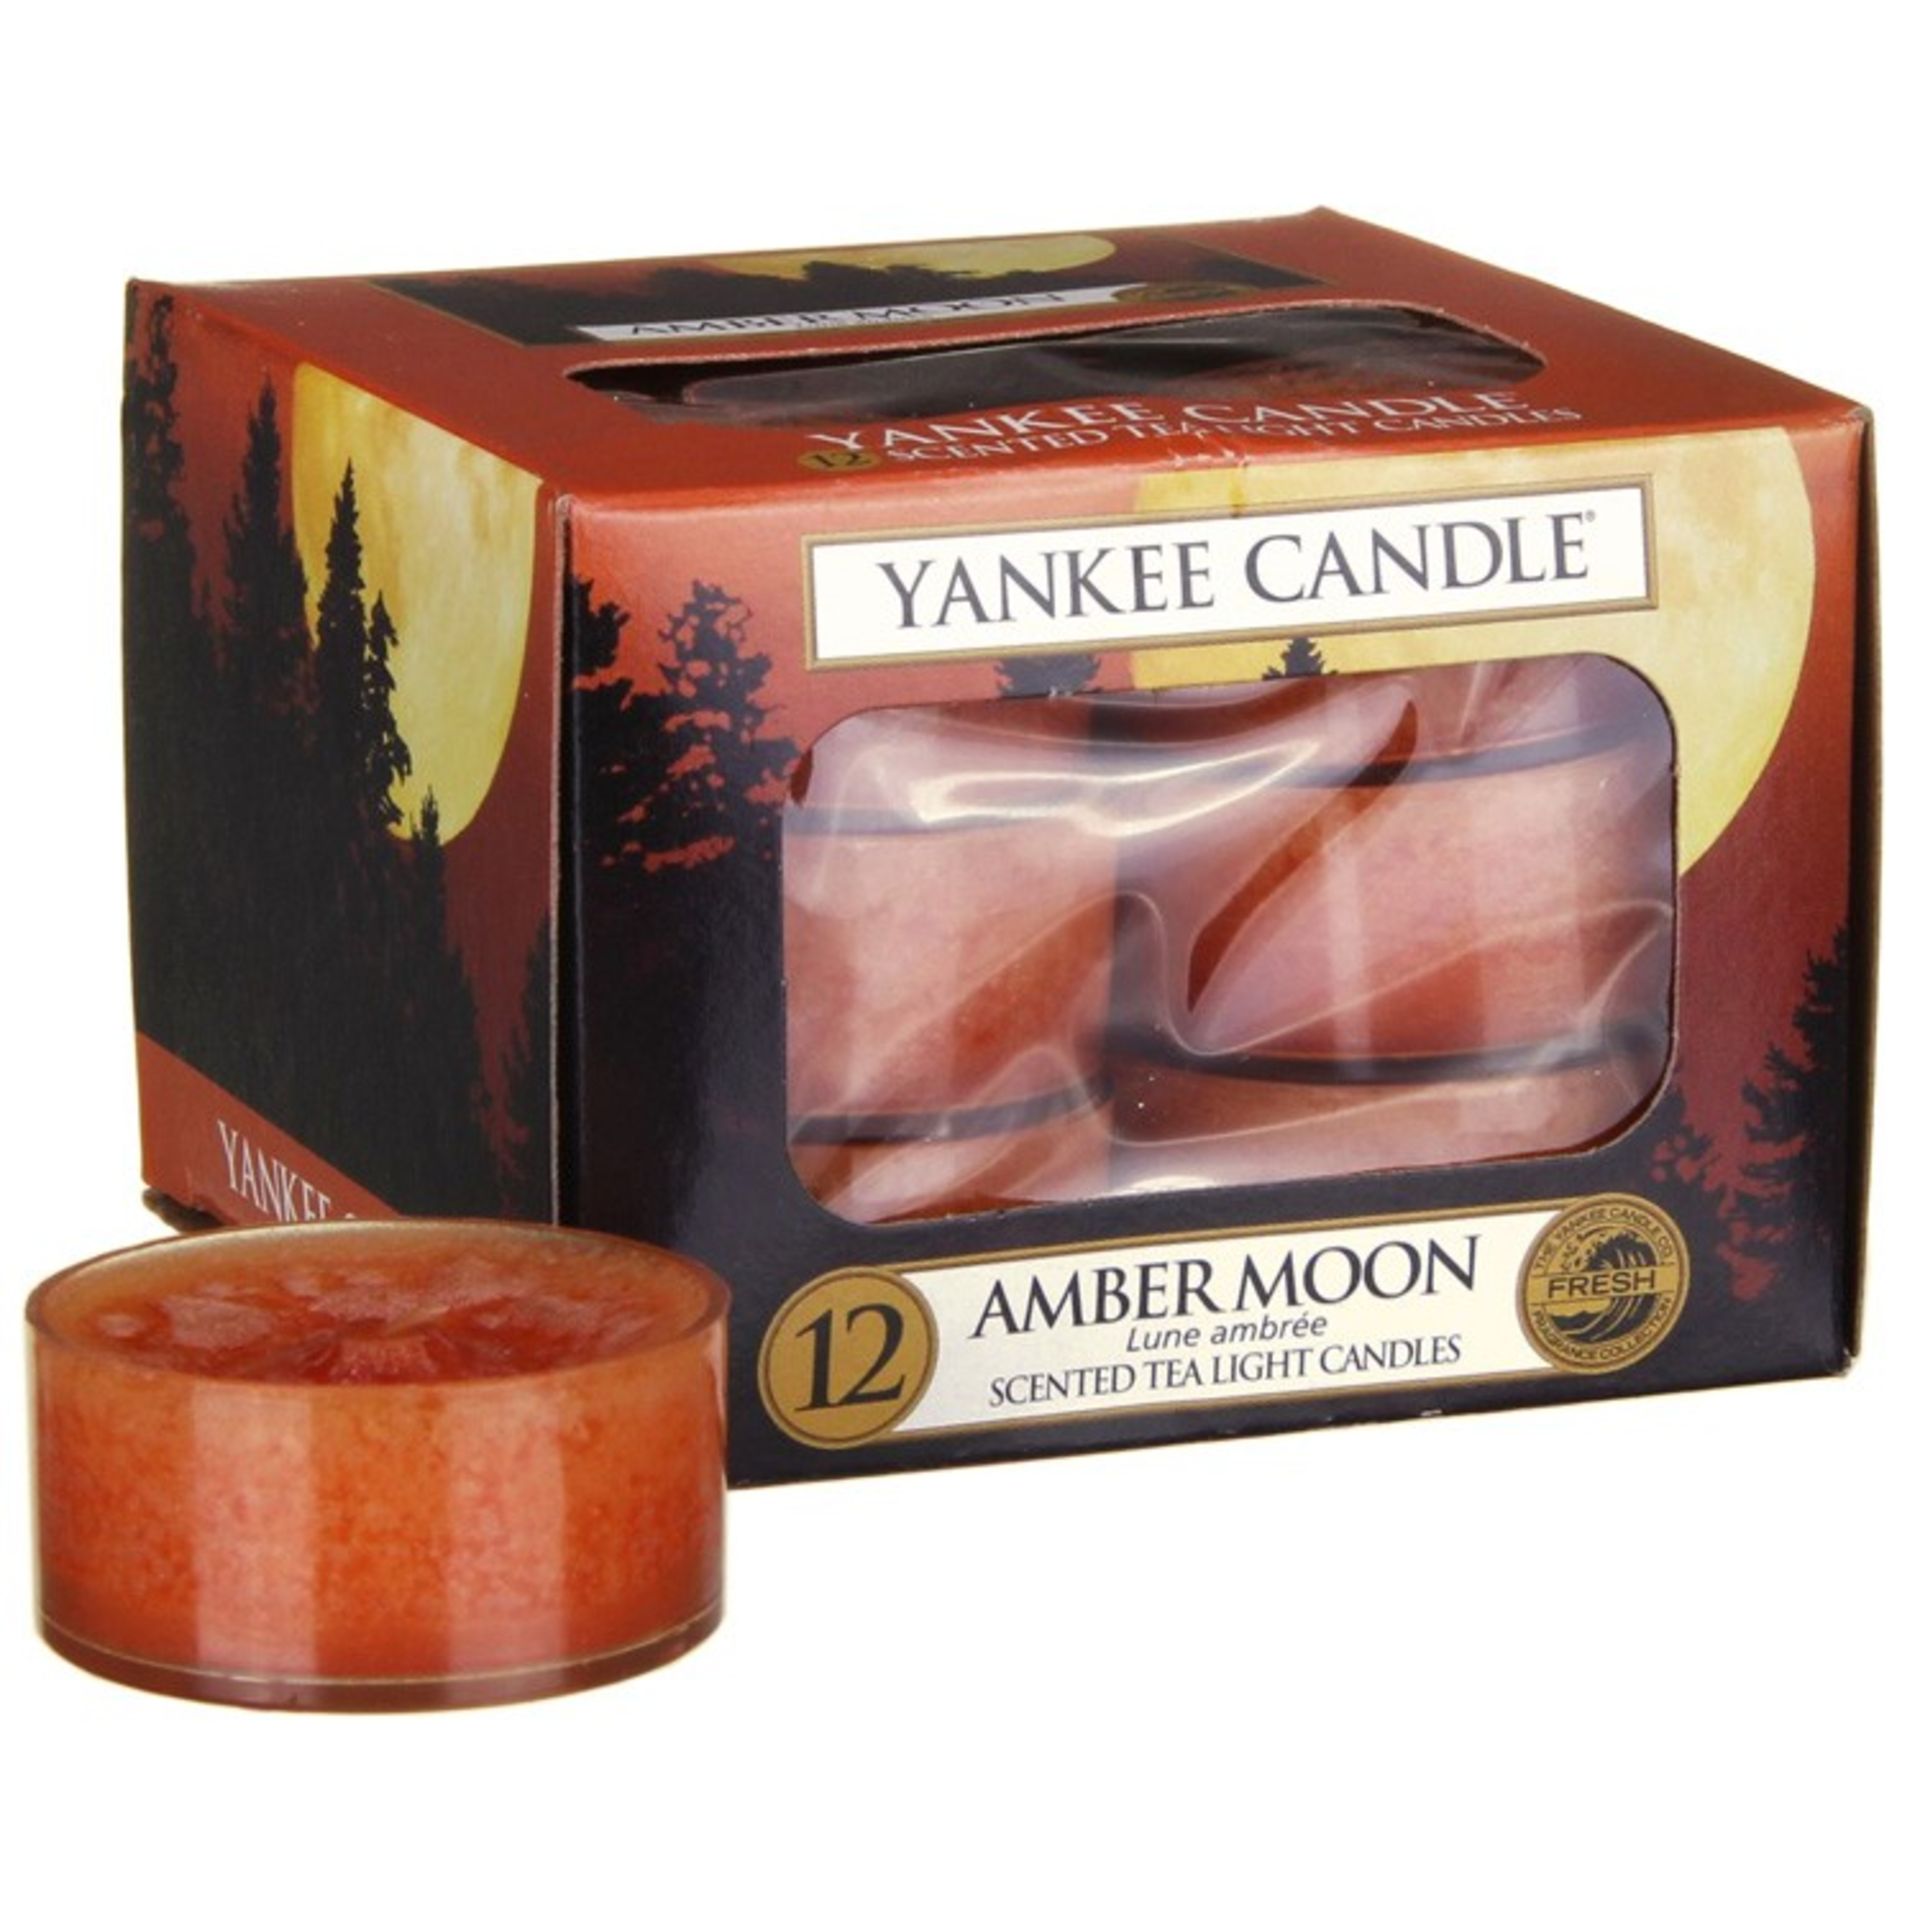 V *TRADE QTY* Brand New 12 Yankee Candle Scented Tea Light Candles Amber Moon eBay Price £7.99 X